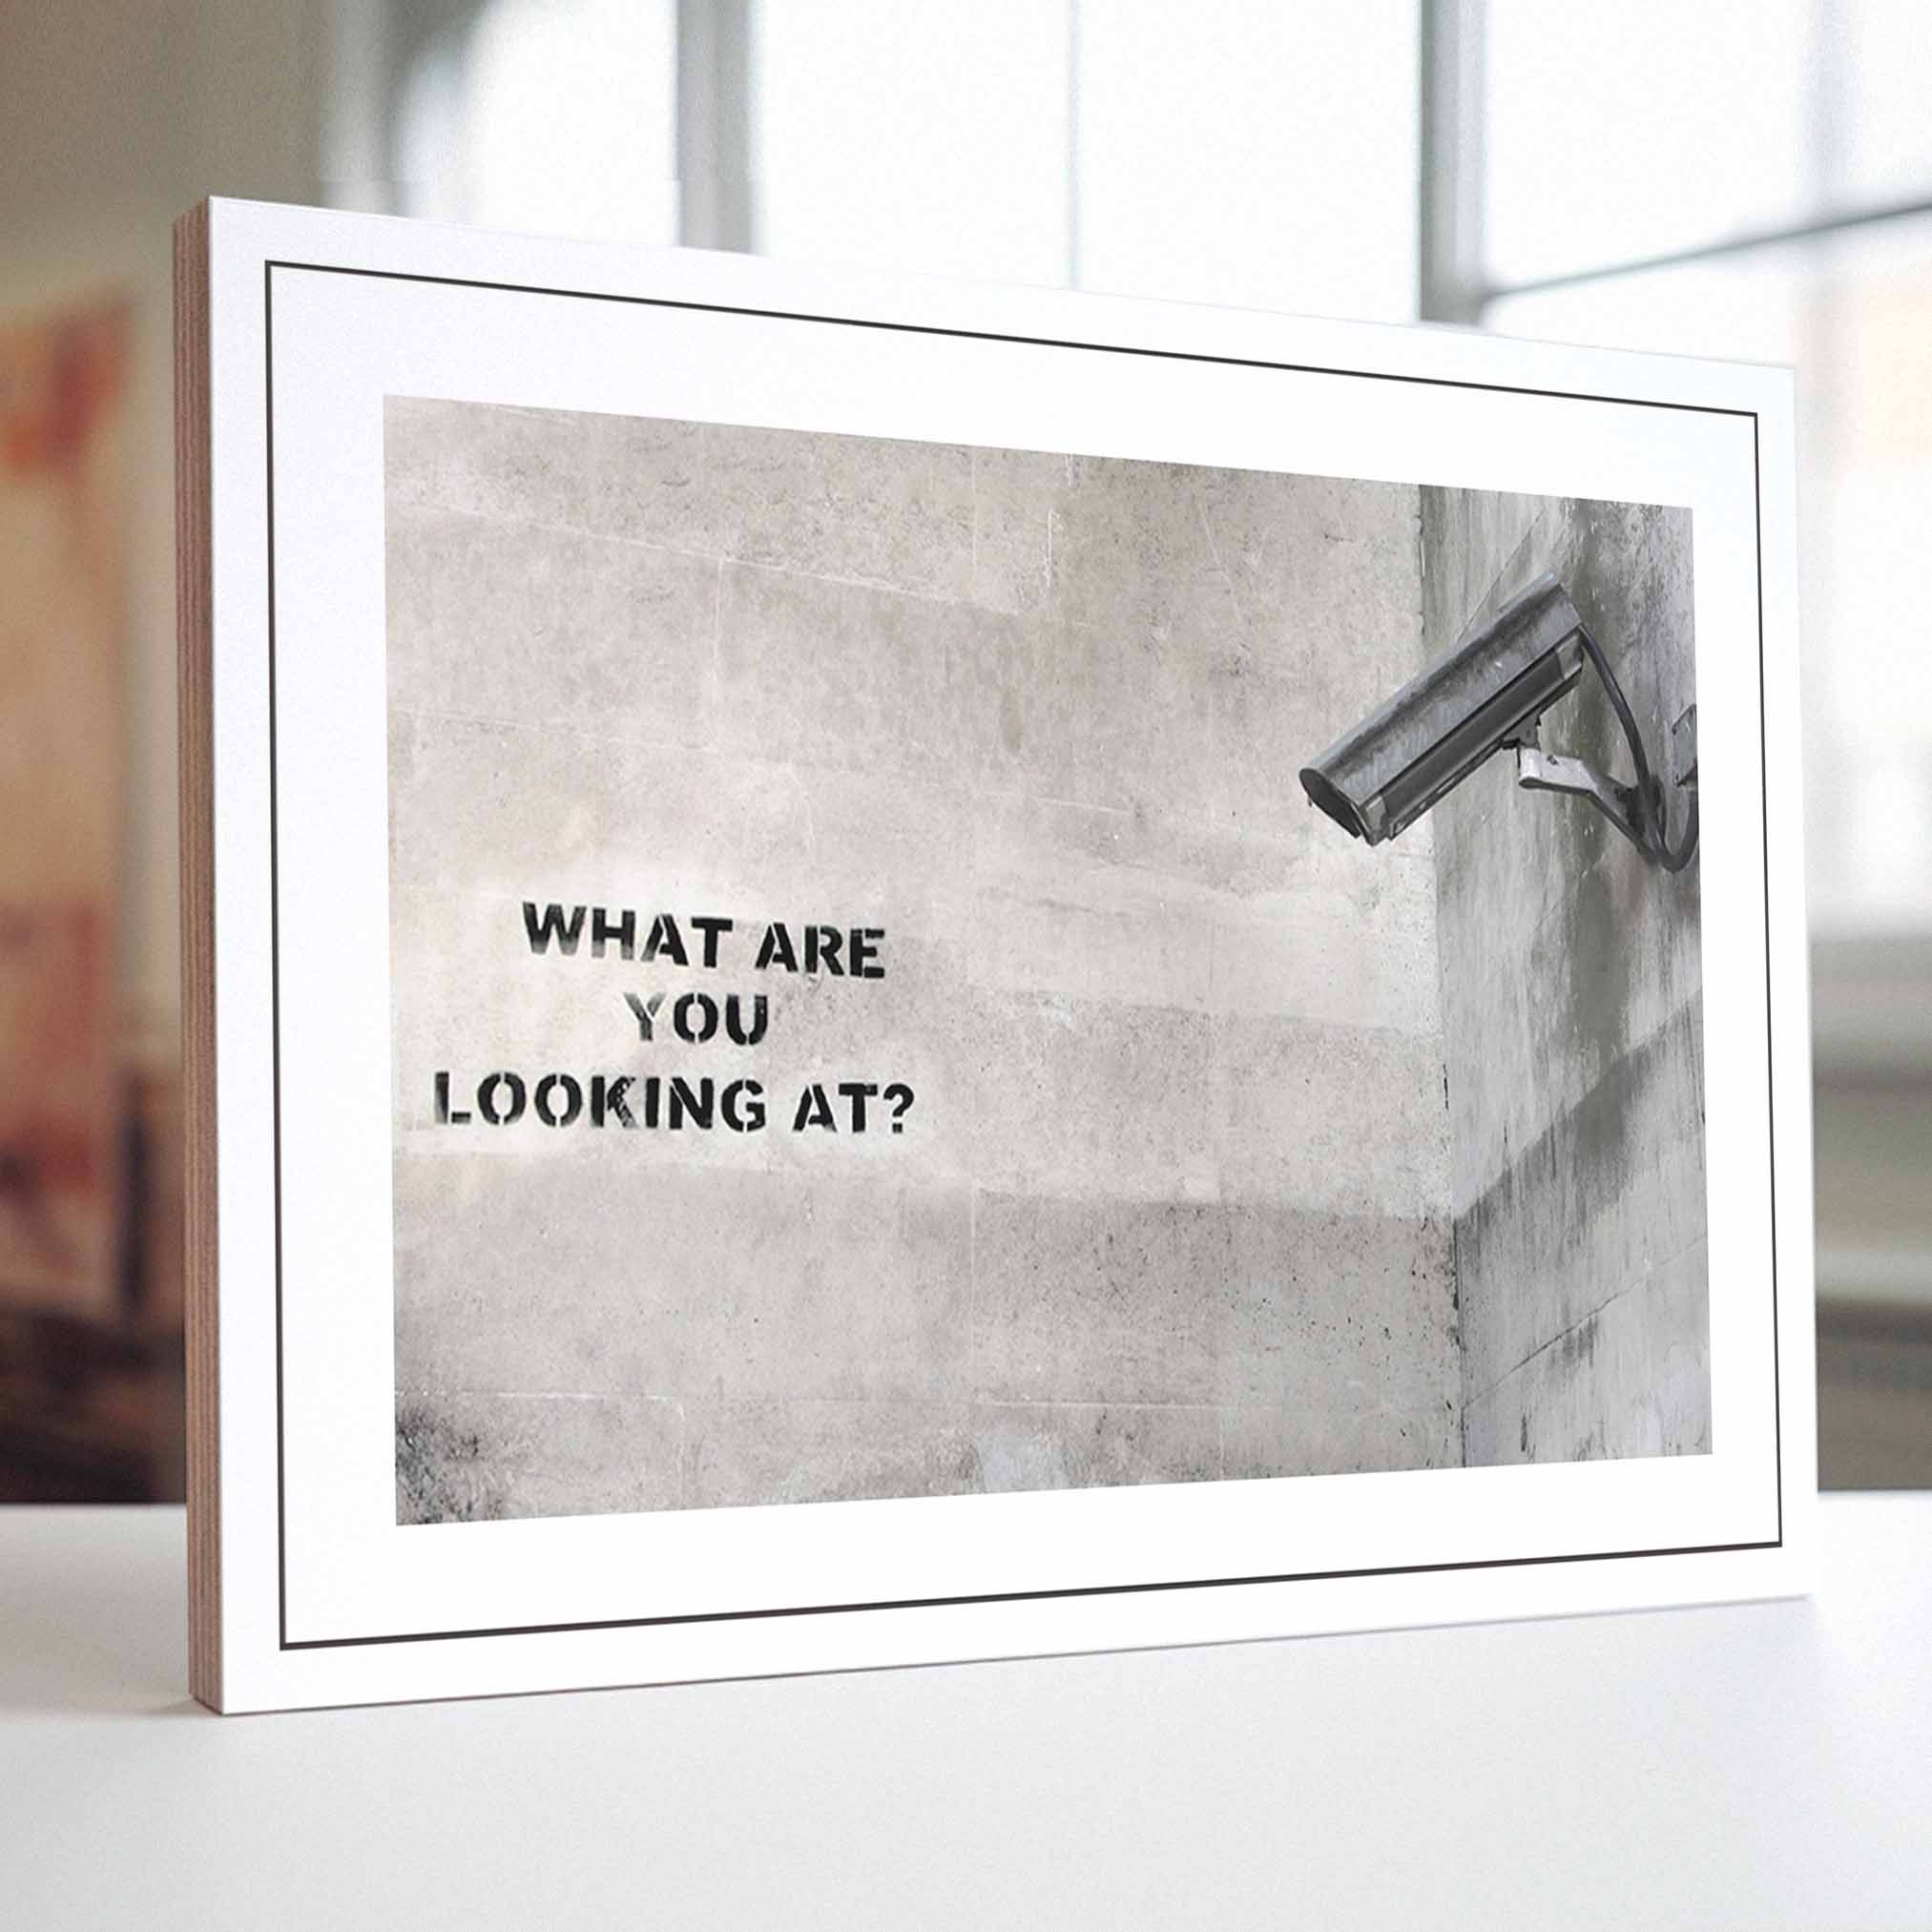 BANKSY - What are you looking at?